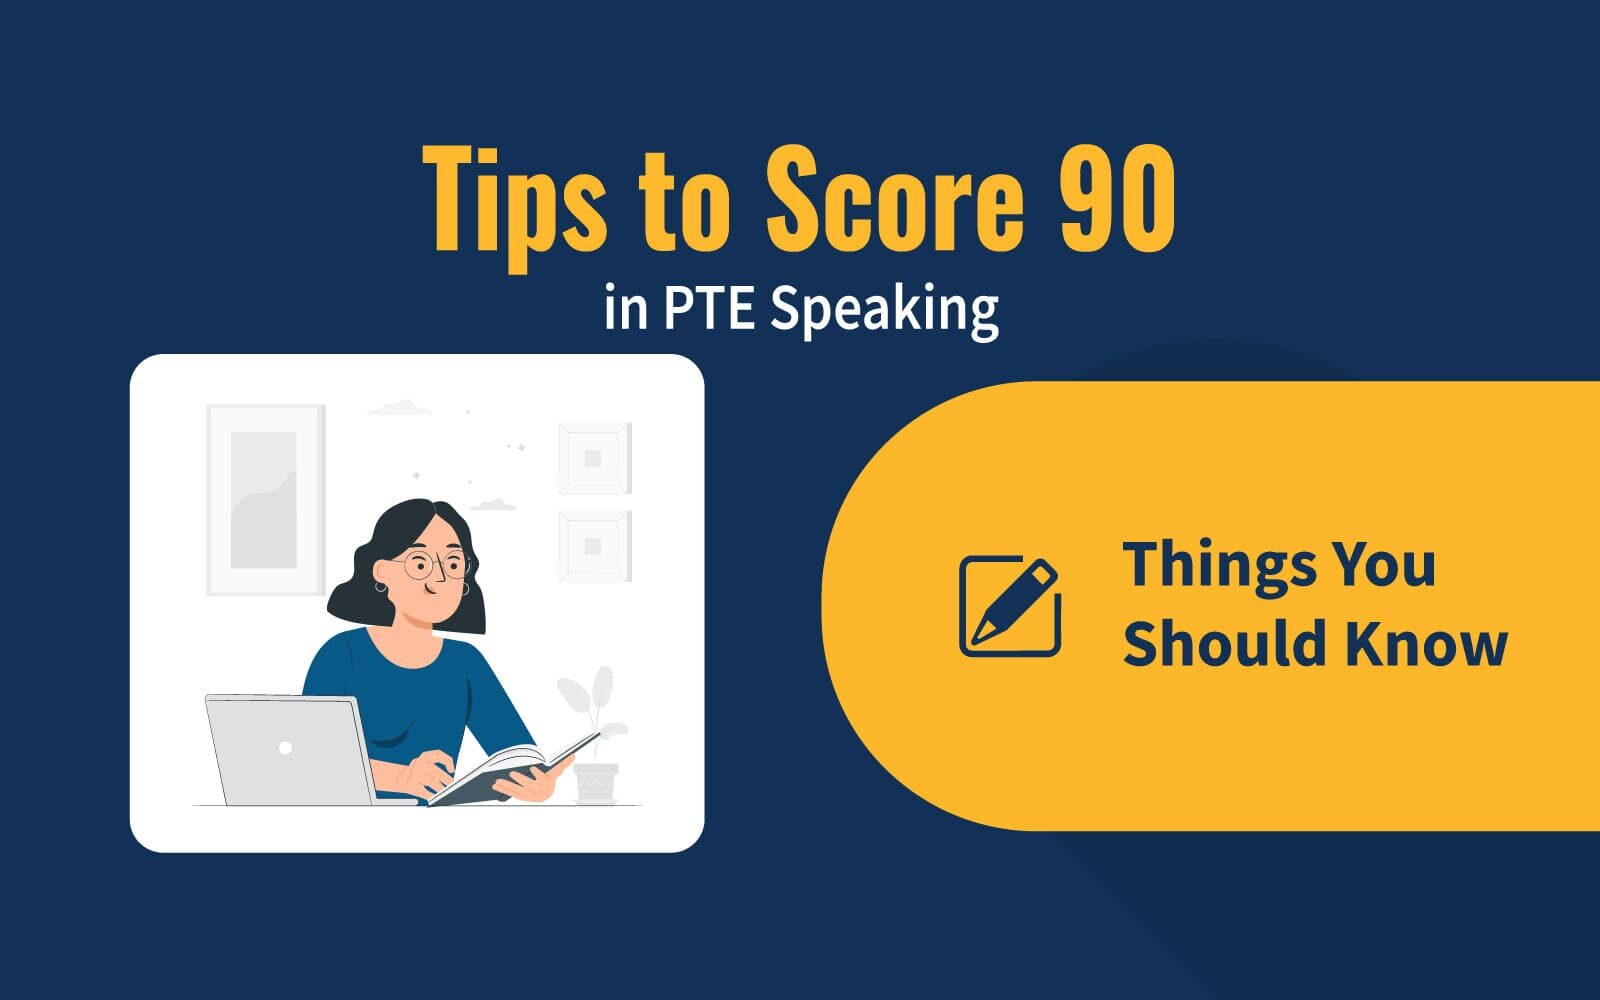 Tips to Score 90 in PTE Speaking